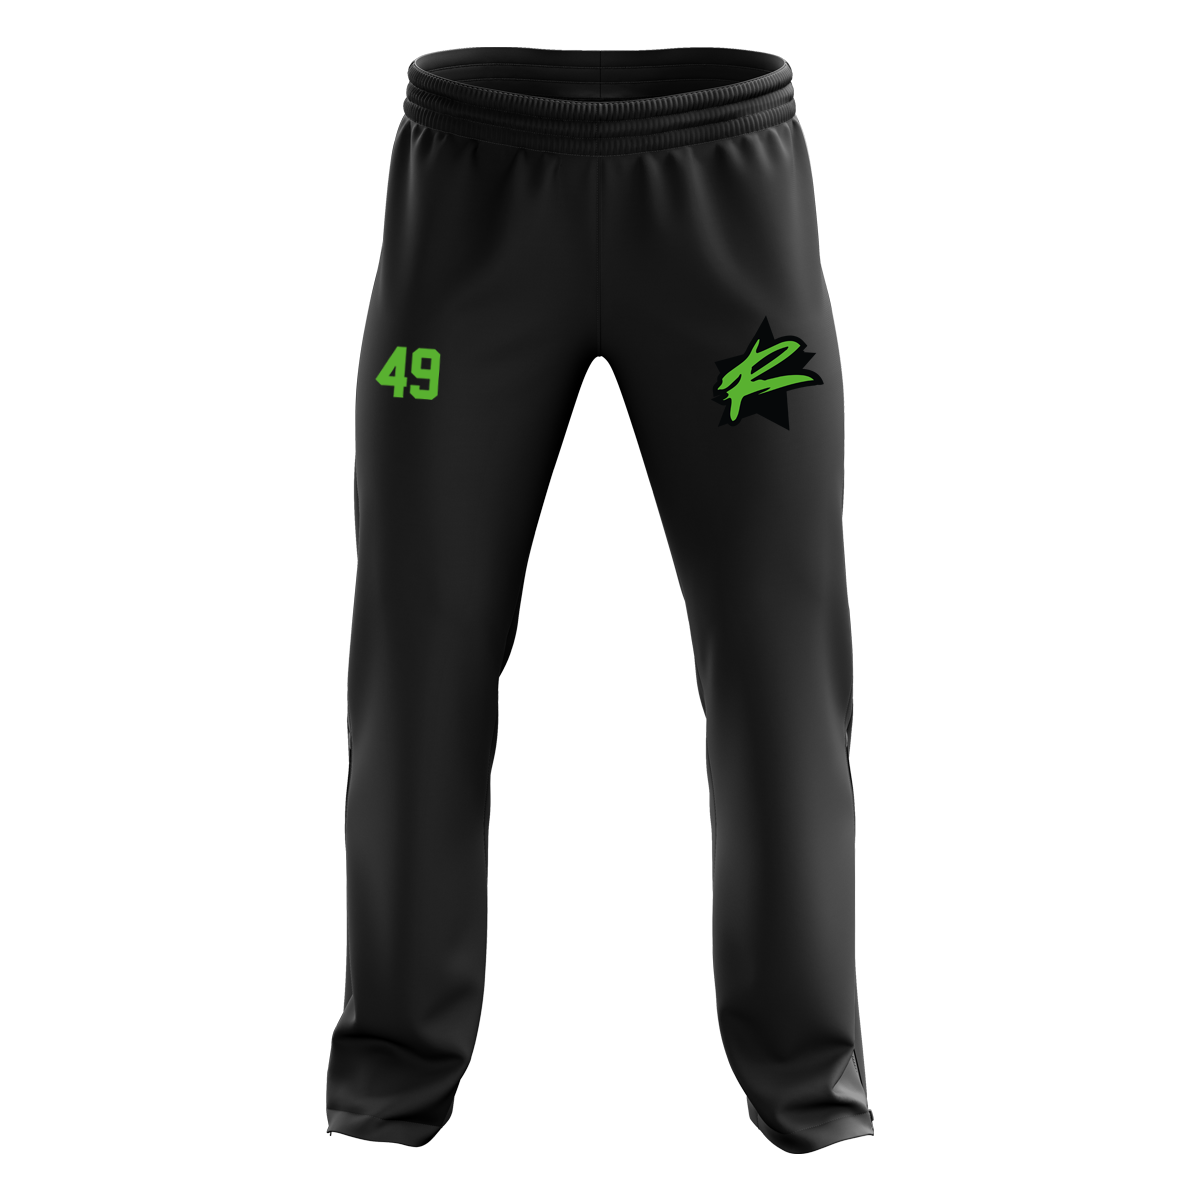 Rebels Tracksuit Pant Windstop with Playernumber/Initials